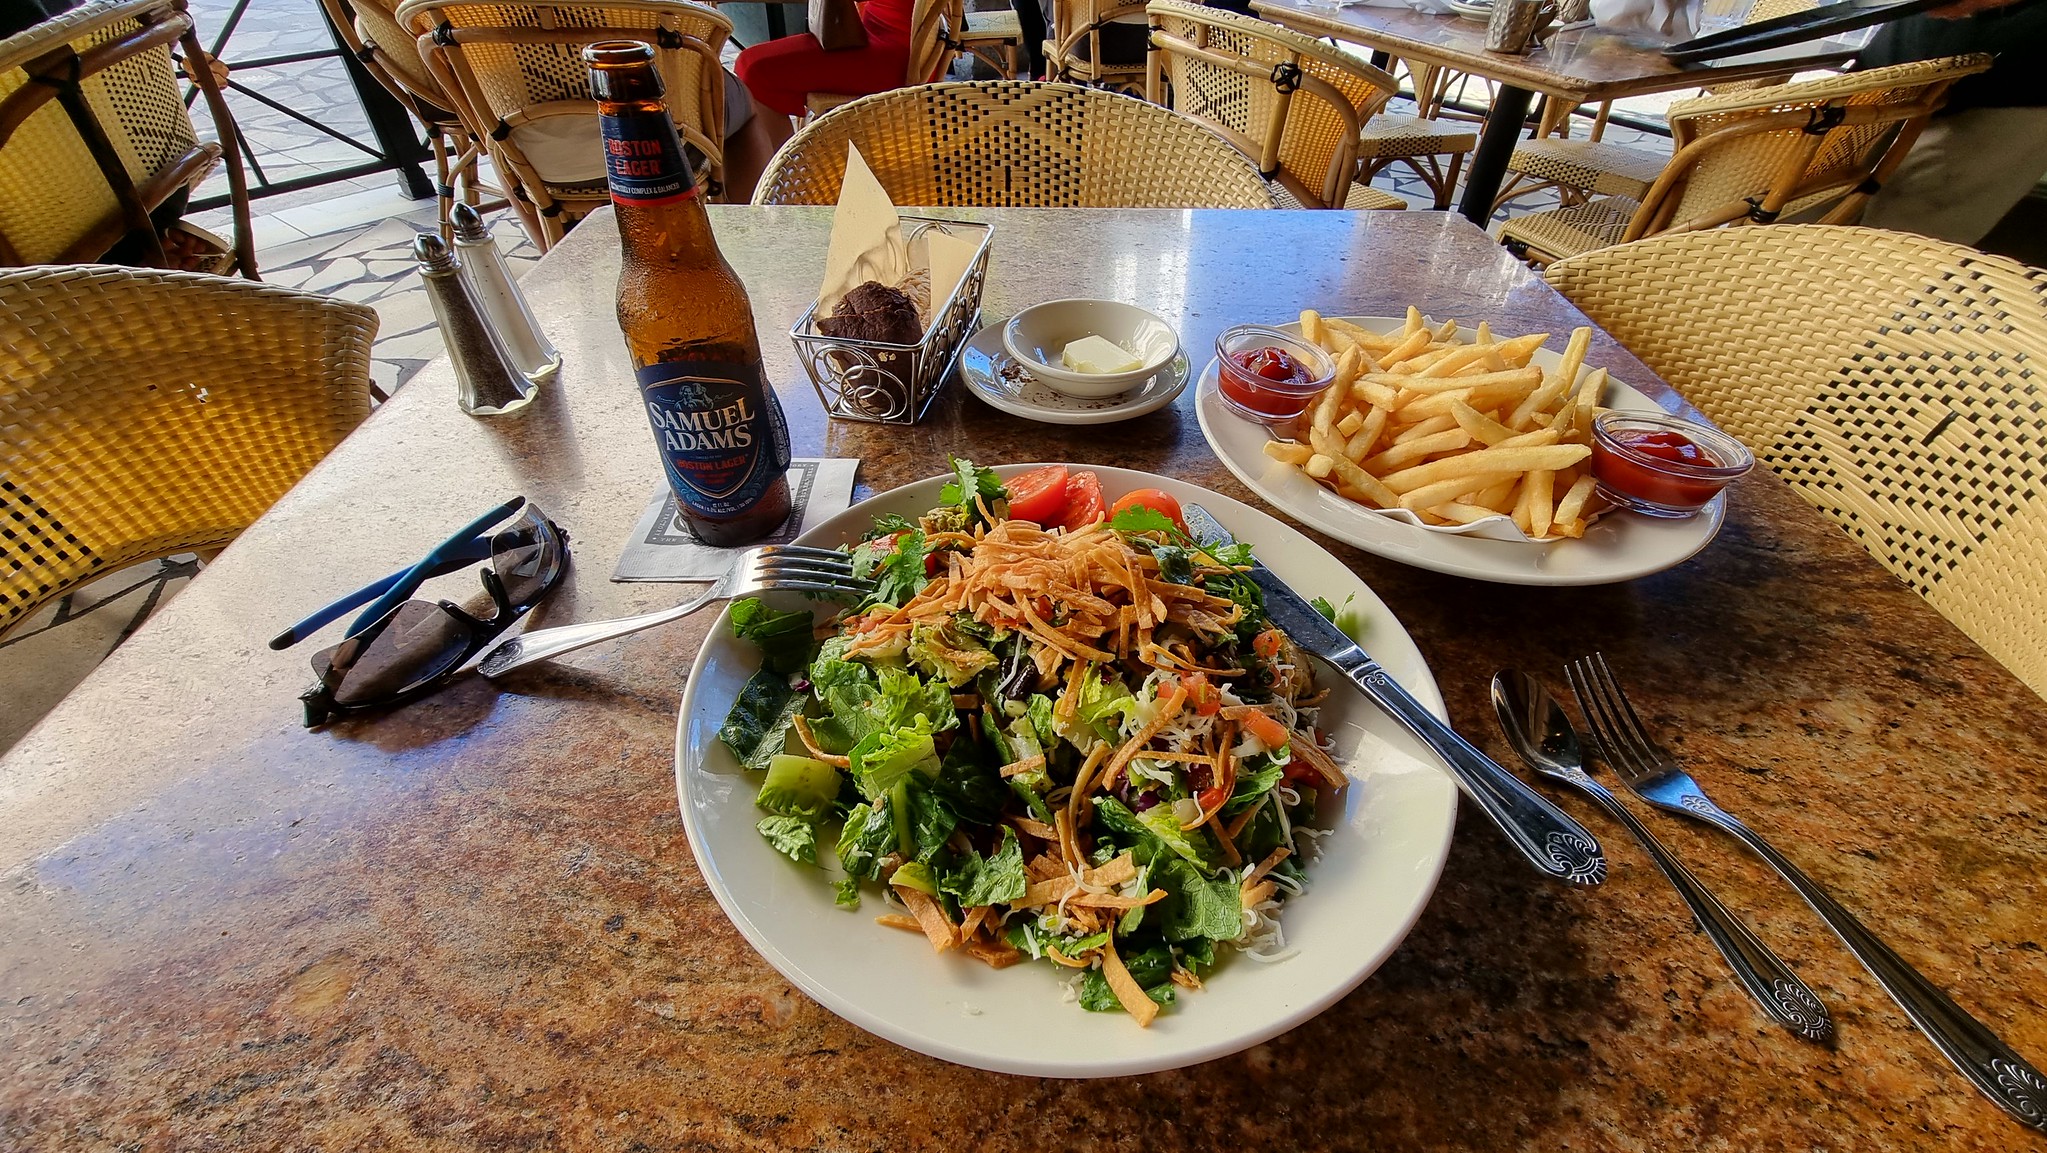 My lunchtime salad, fries and Sam Adams enjoyed at The Cheesecake Factory in Waikiki